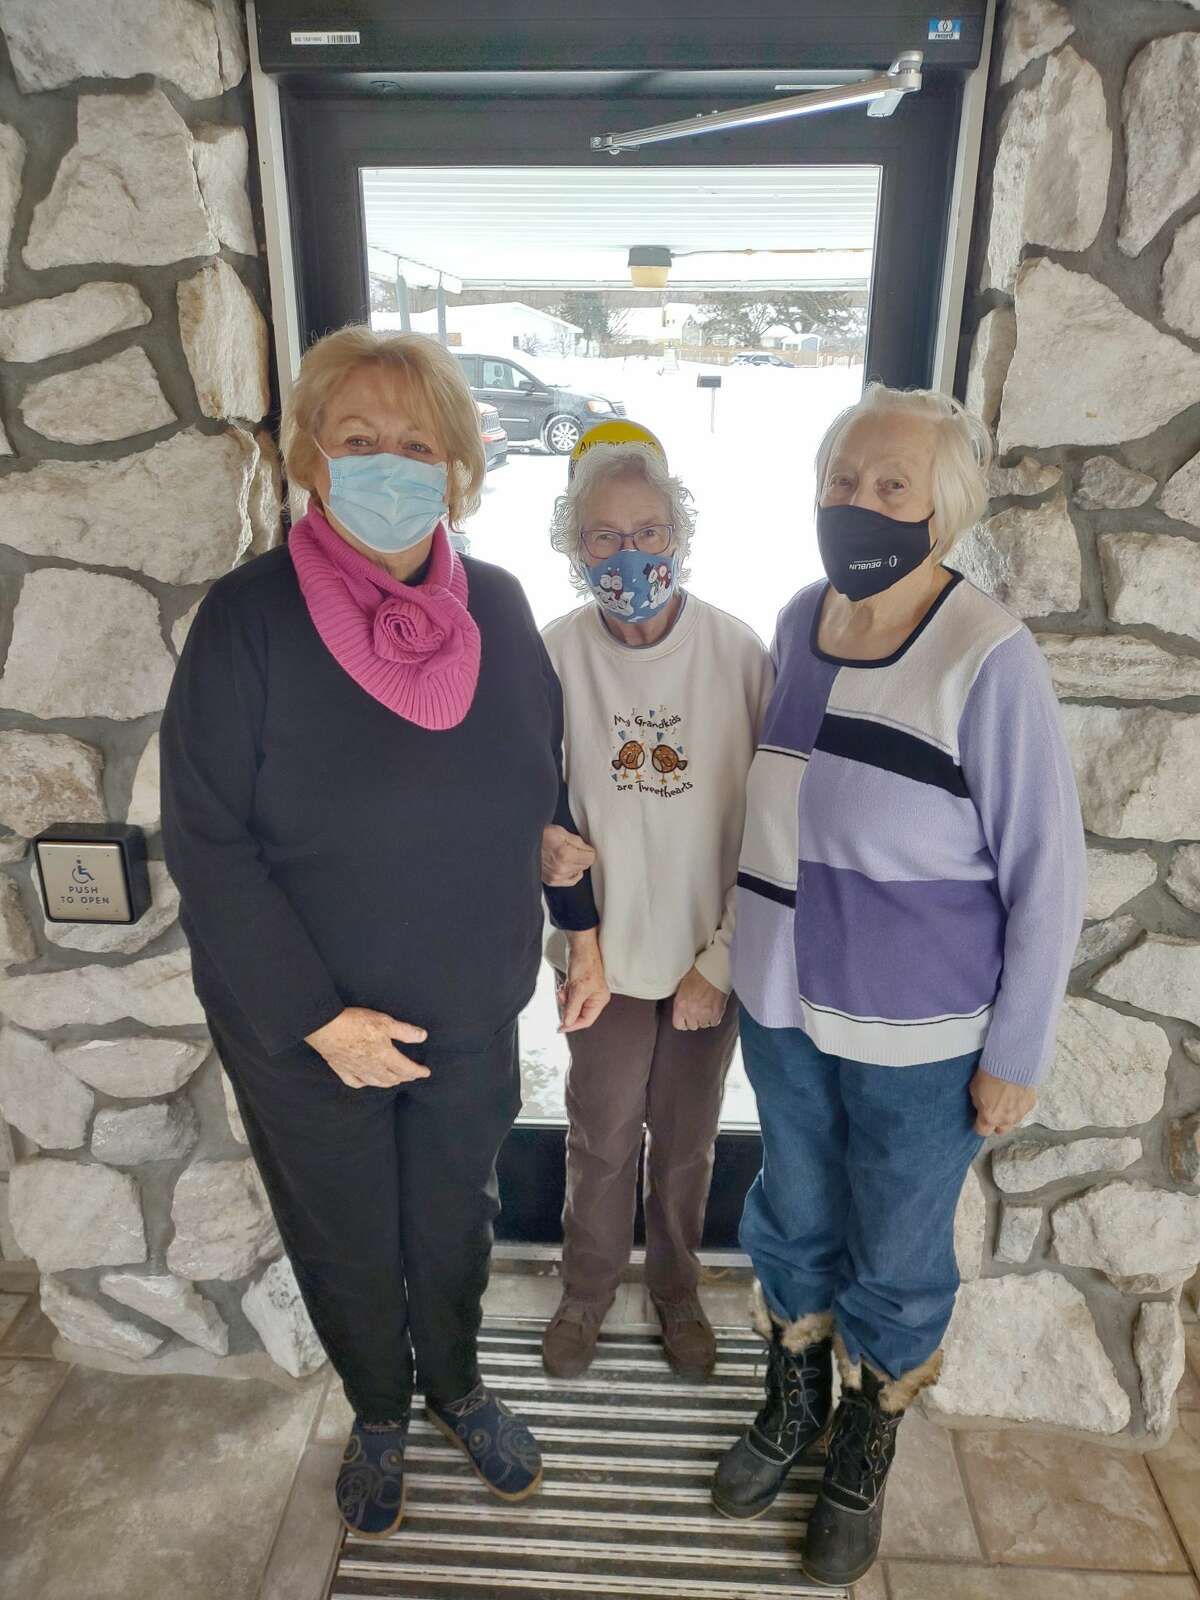 Pat Murdock, Susie Tritten, Dawn McLamb share the new doors that were installed at the Wagoner Community Center.  The cost of the doors was covered in part by 100 Women Who Care Manistee County and the craft fair hosted by the Manistee County Council on Aging during Sleighbell weekend in  December 2021.